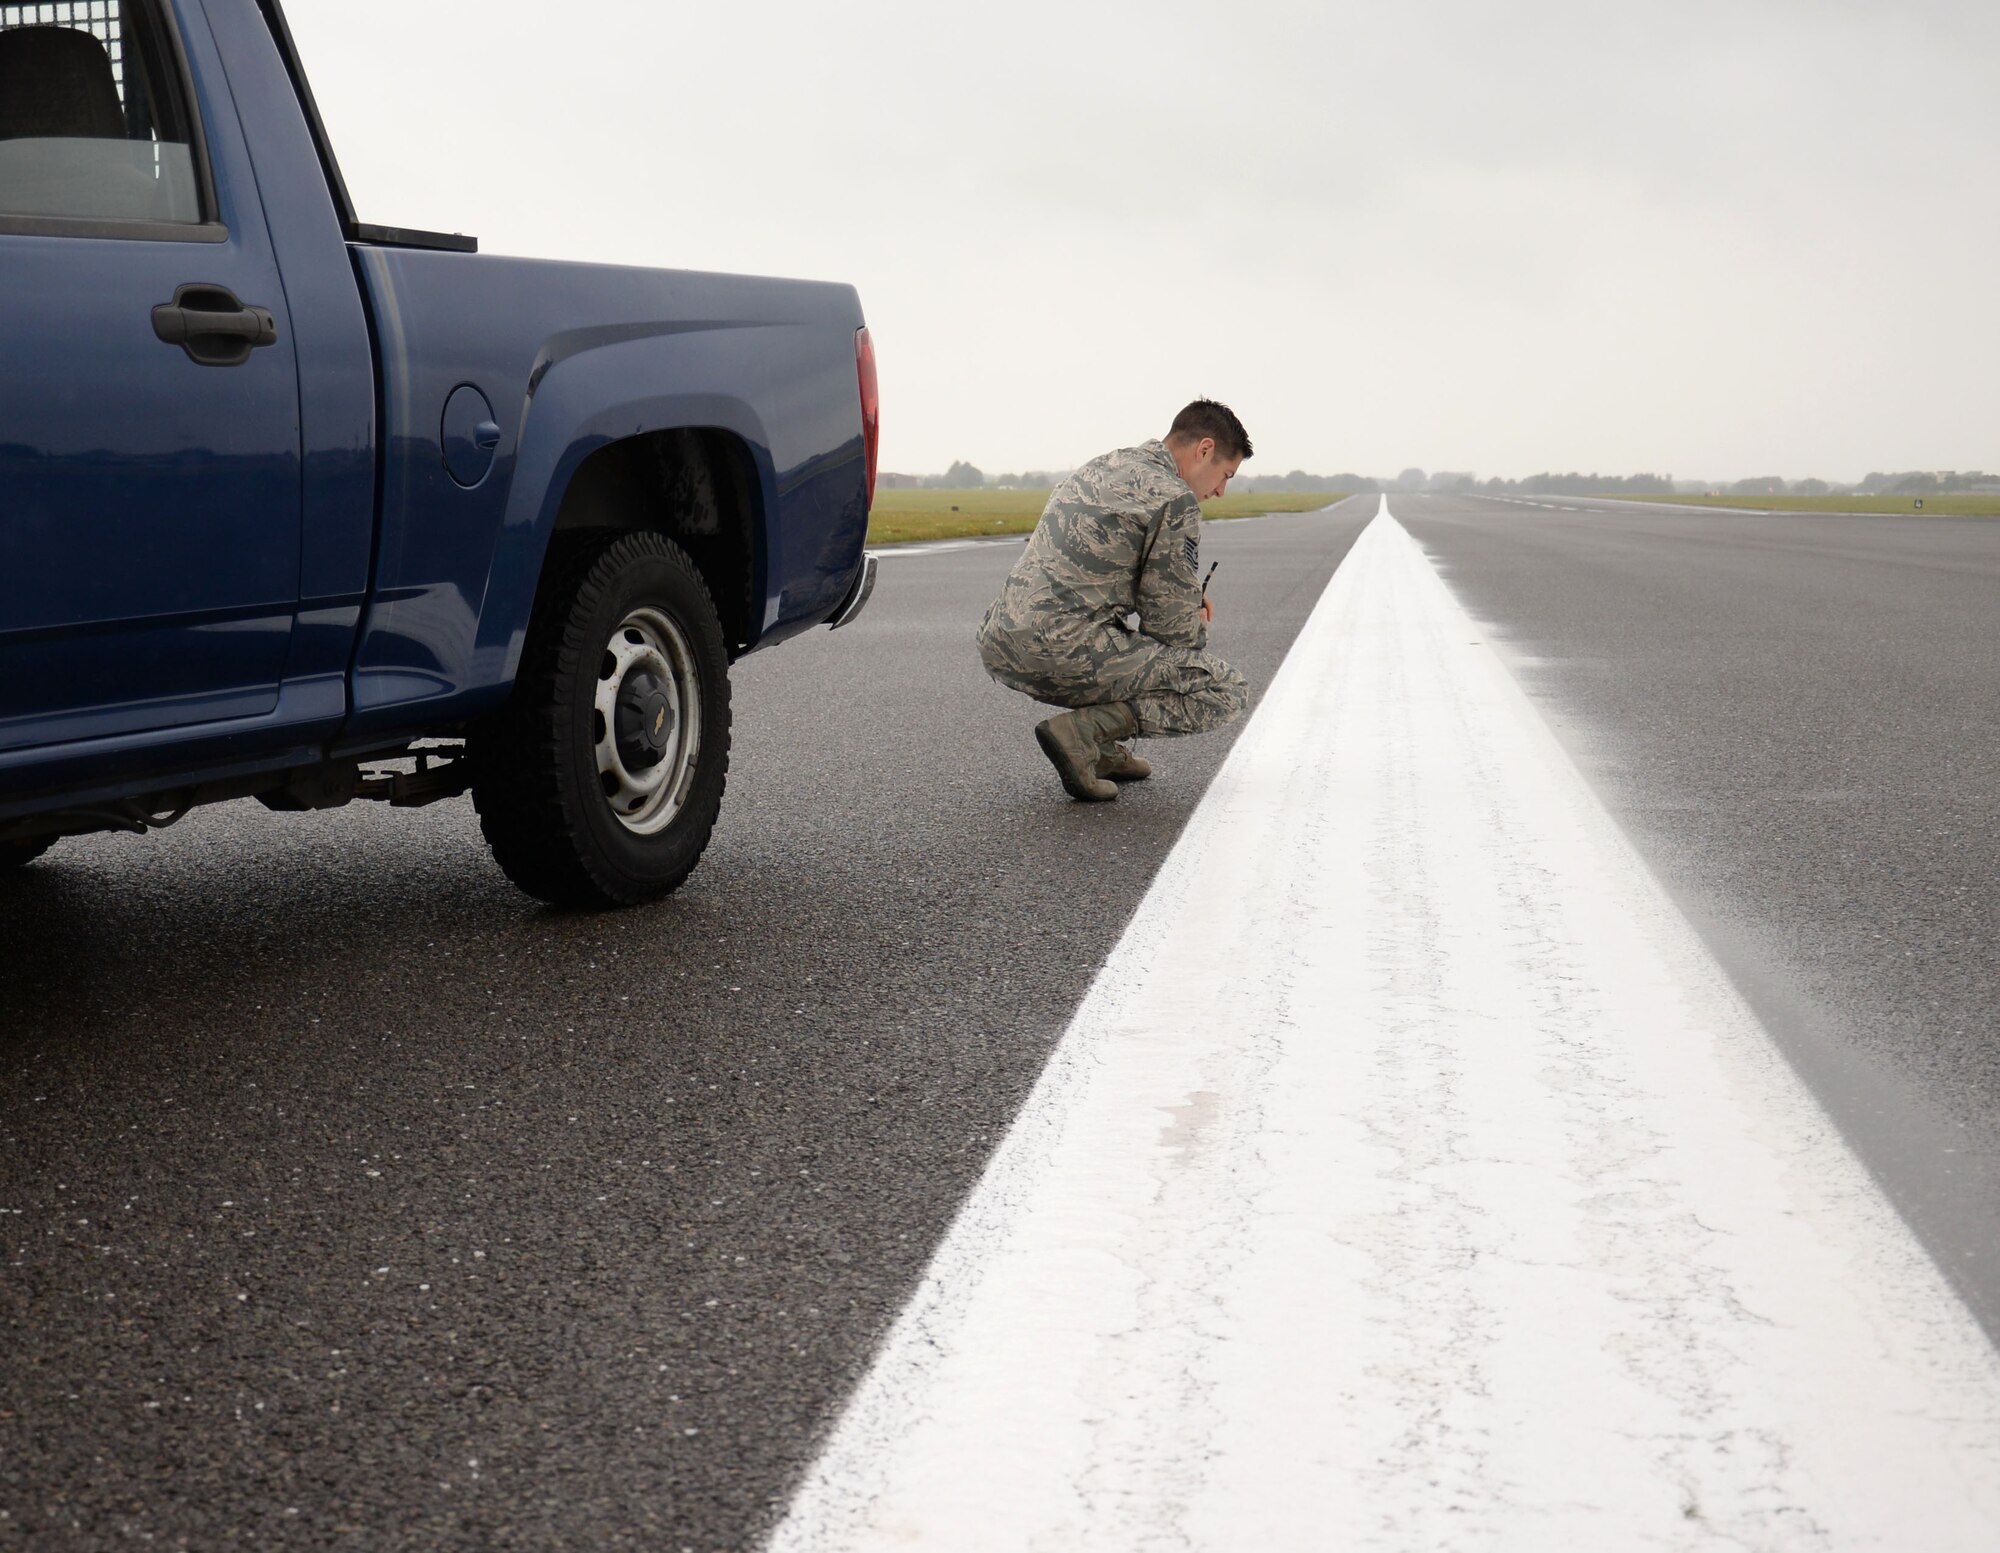 U.S. Air Force Tech. Sgt. Joshua Johnson, 100th Operations Support Squadron NCO in charge of Airfield Management training, checks the paint on the runway Aug. 11, 2016, on RAF Mildenhall, England. Johnson deals with safety orientated airfield management such as inspecting the runways, the taxiways, and making sure there are no pavement deficiencies. (U.S. Air Force photo by Gina Randall)